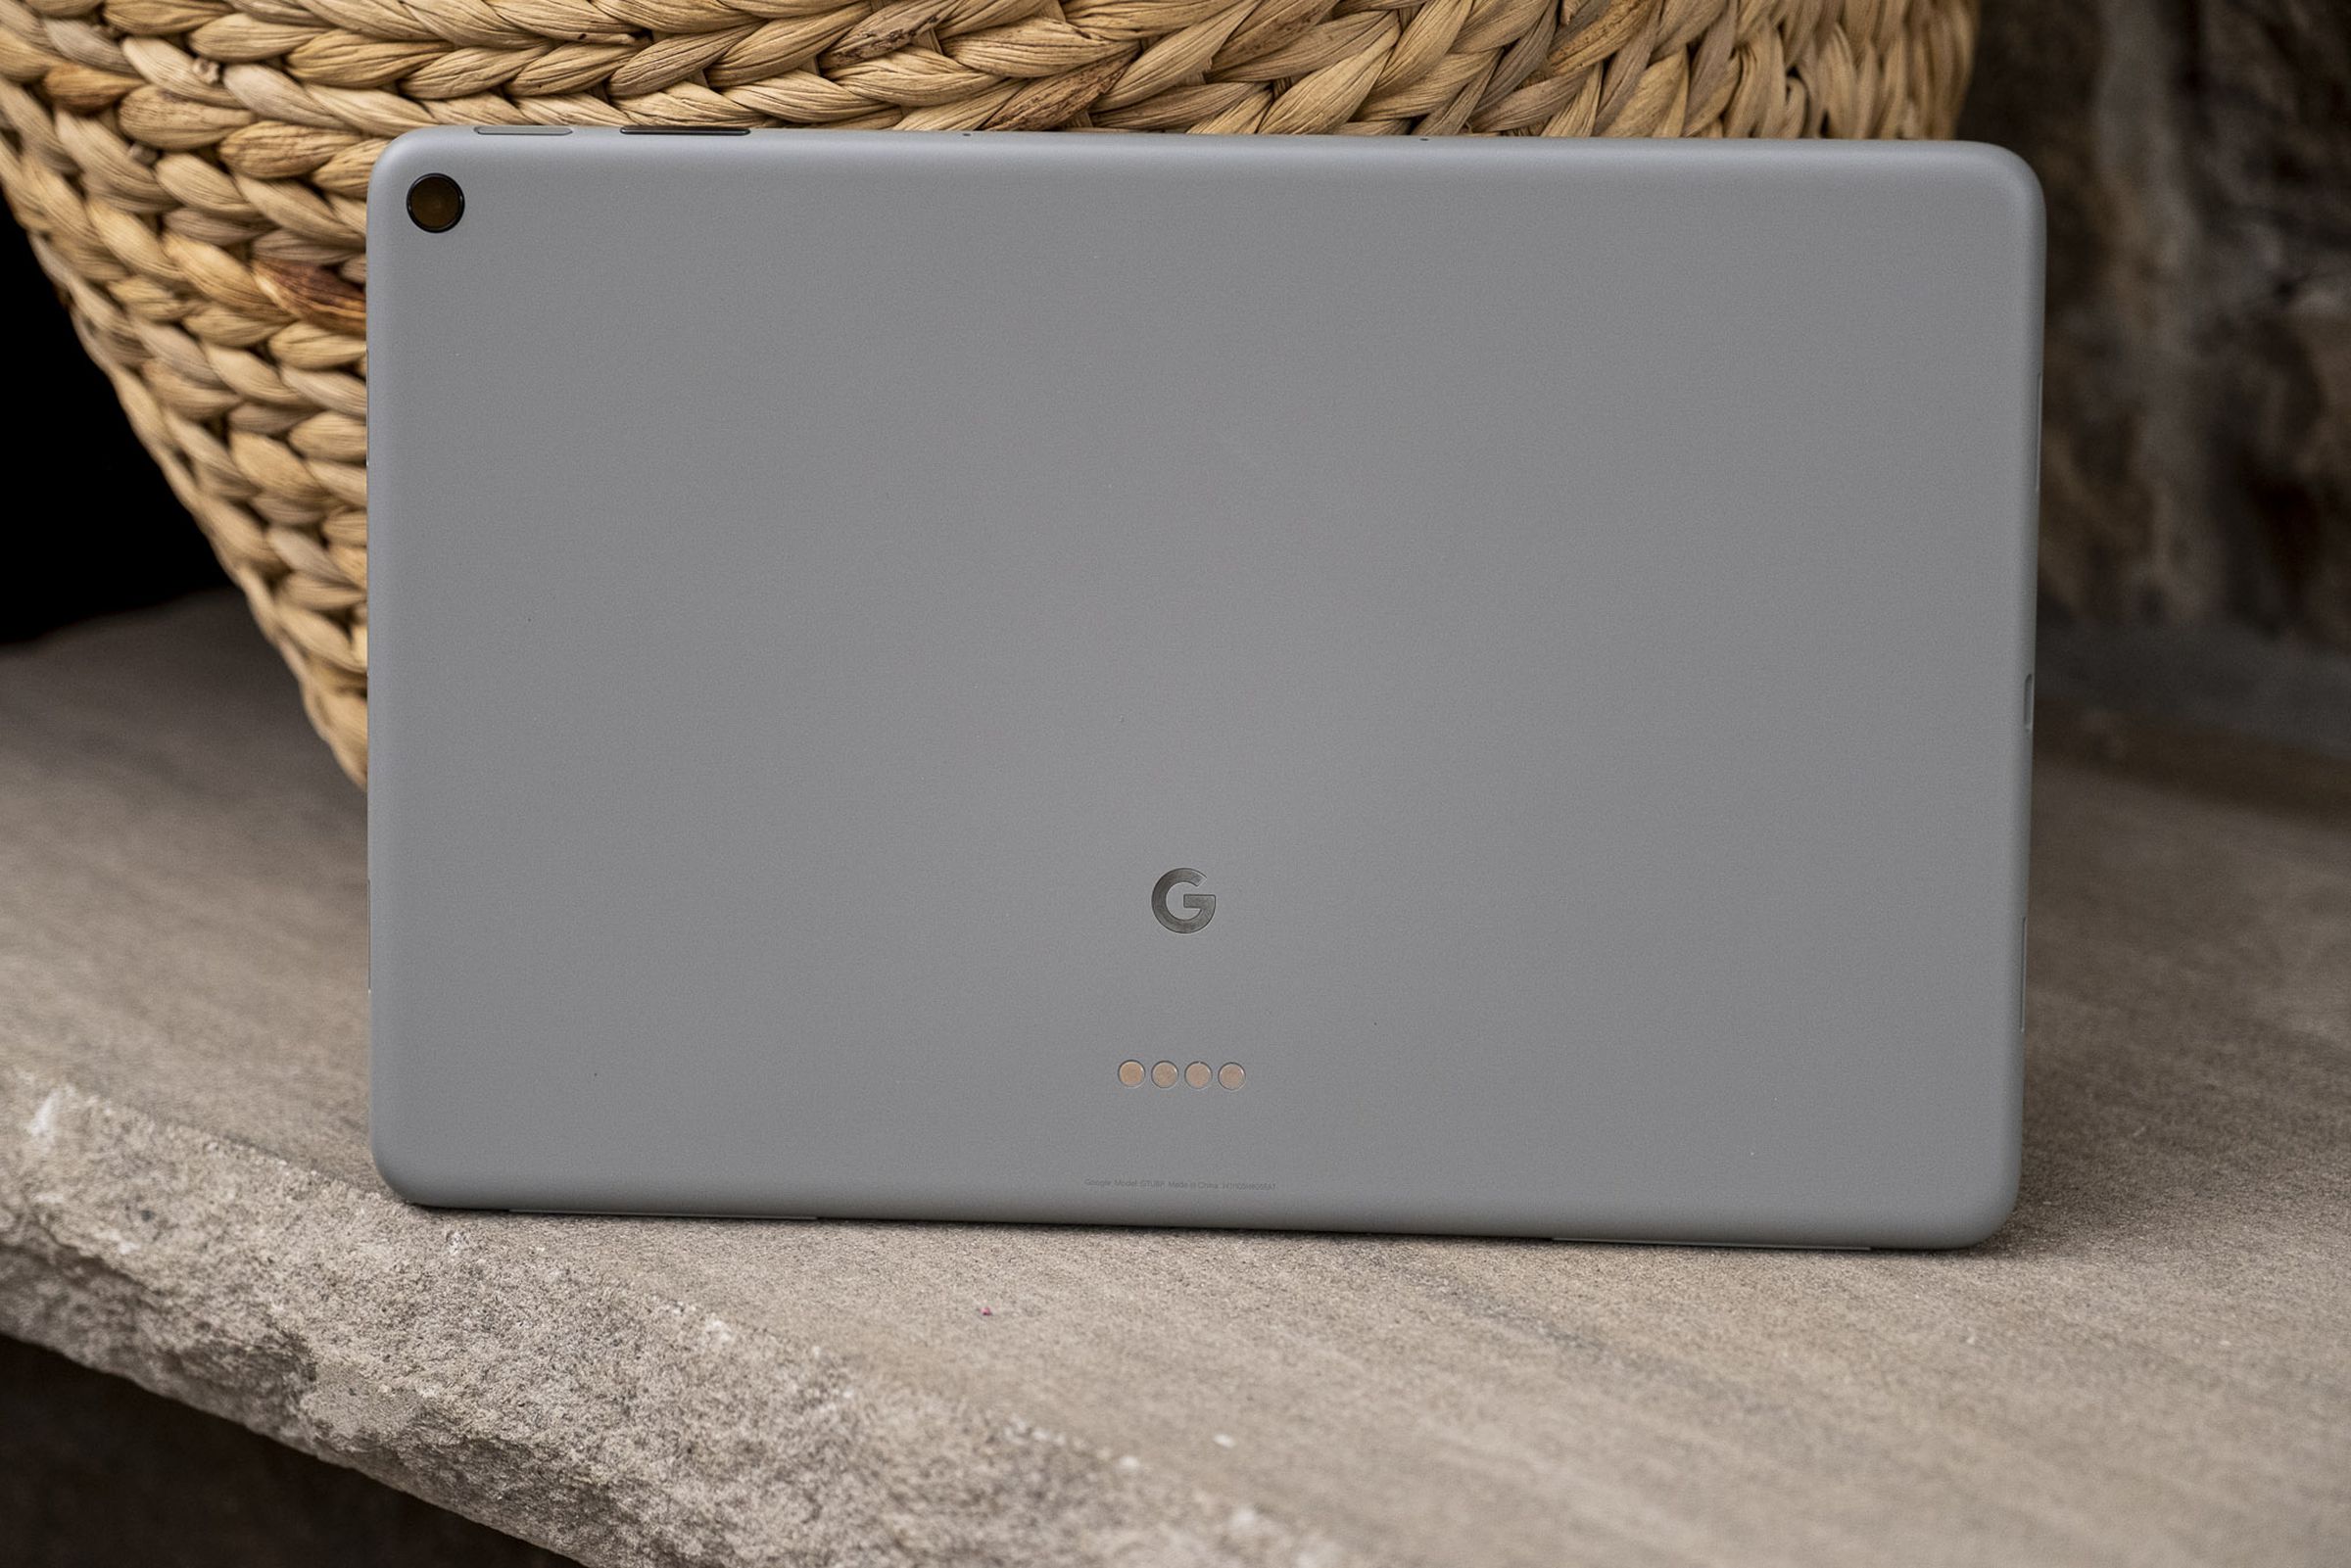 The back of the Pixel Tablet